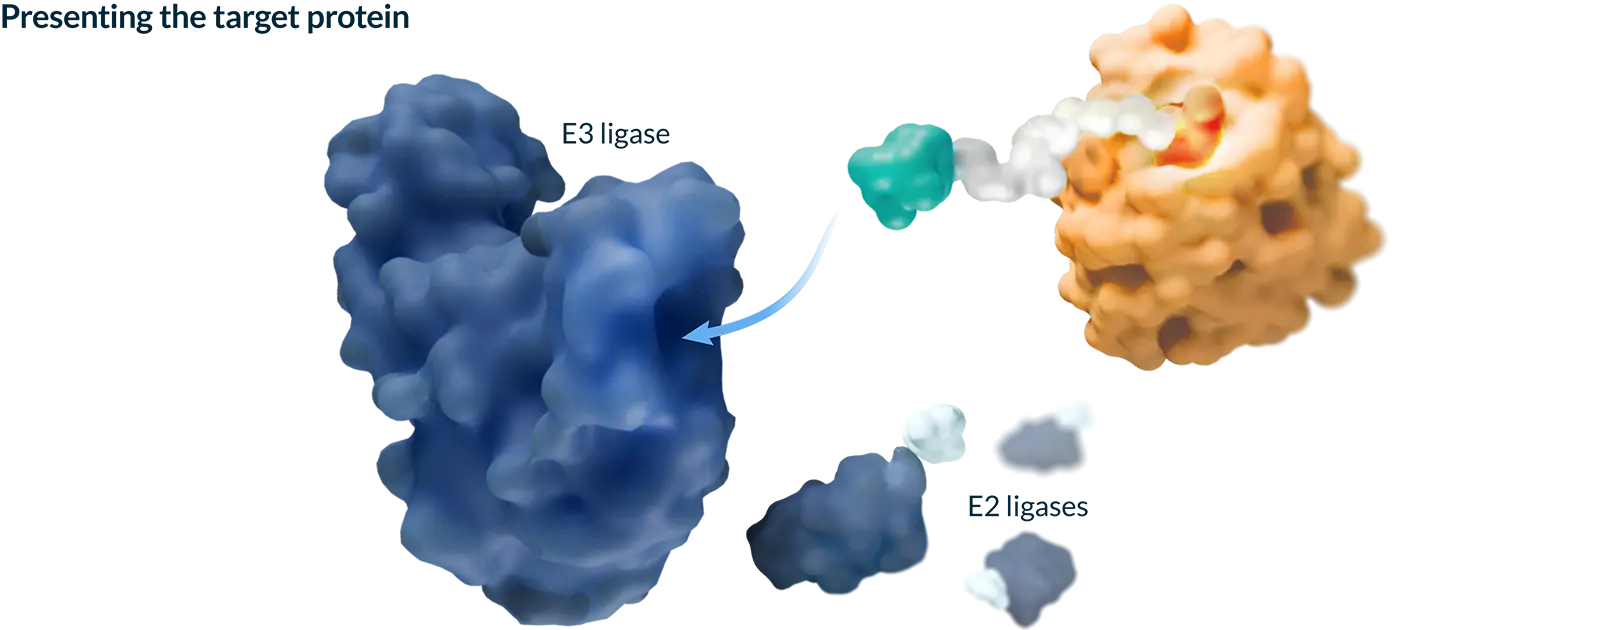 Step 2 of 4: Kymera’s tri-colored heterobifunctional degrader molecule presents the disease-causing protein to an E3 ligase.